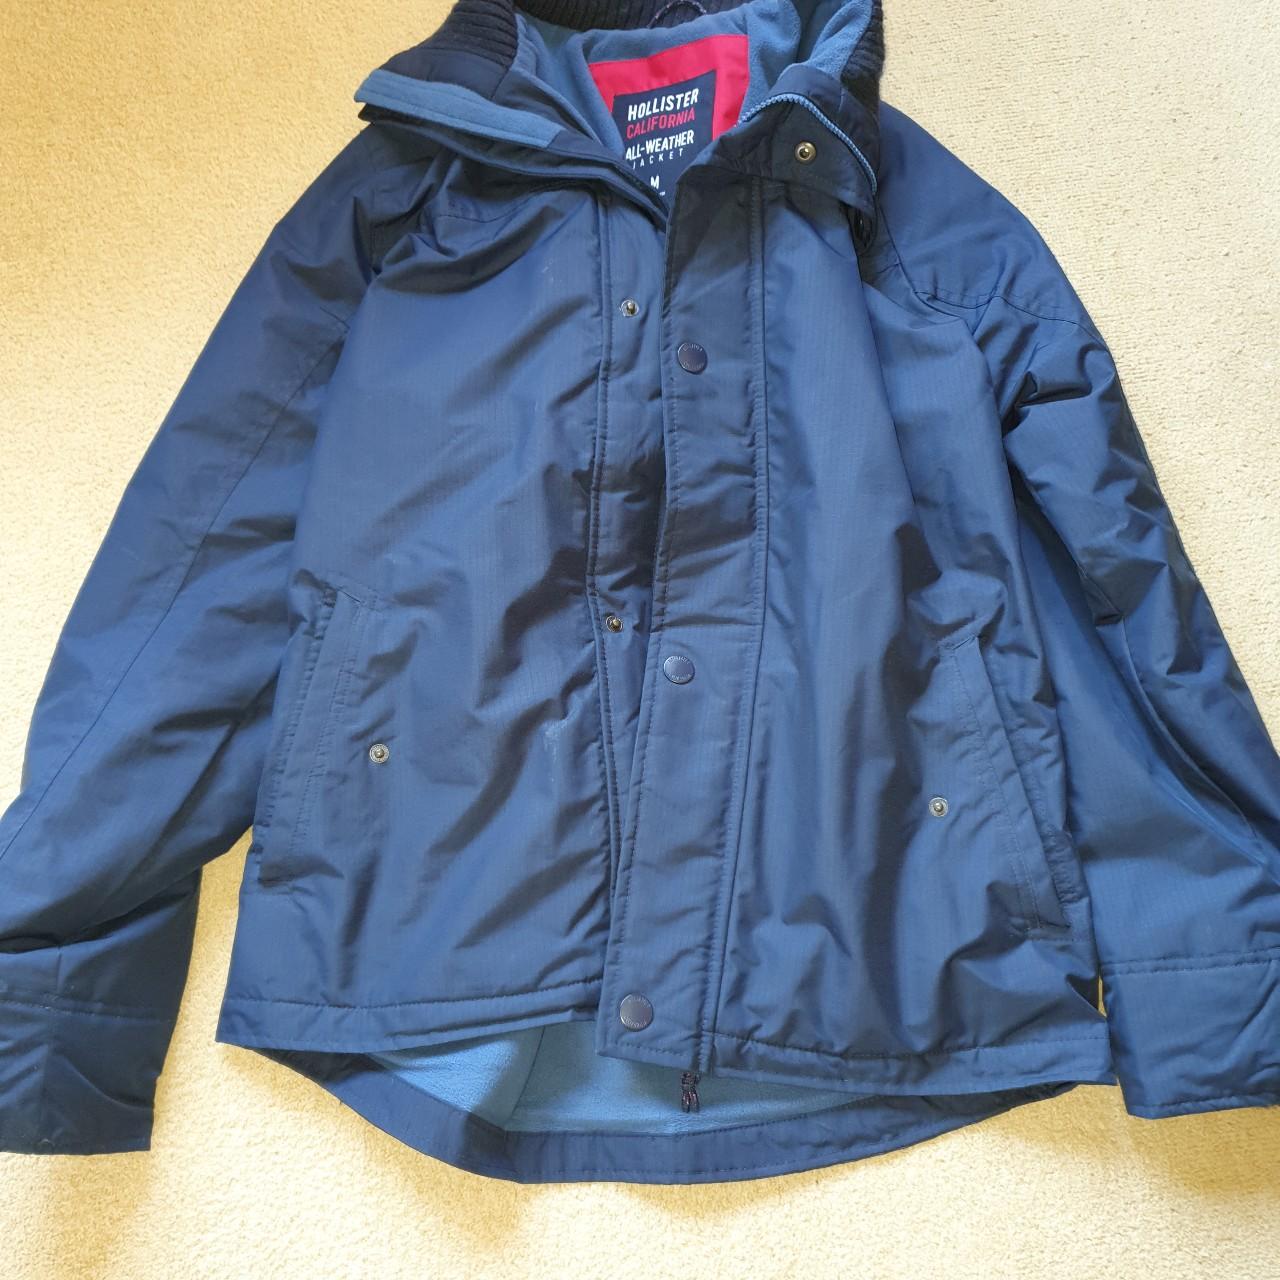 Hollister Mens All Weather Jacket, Navy, Barely worn 